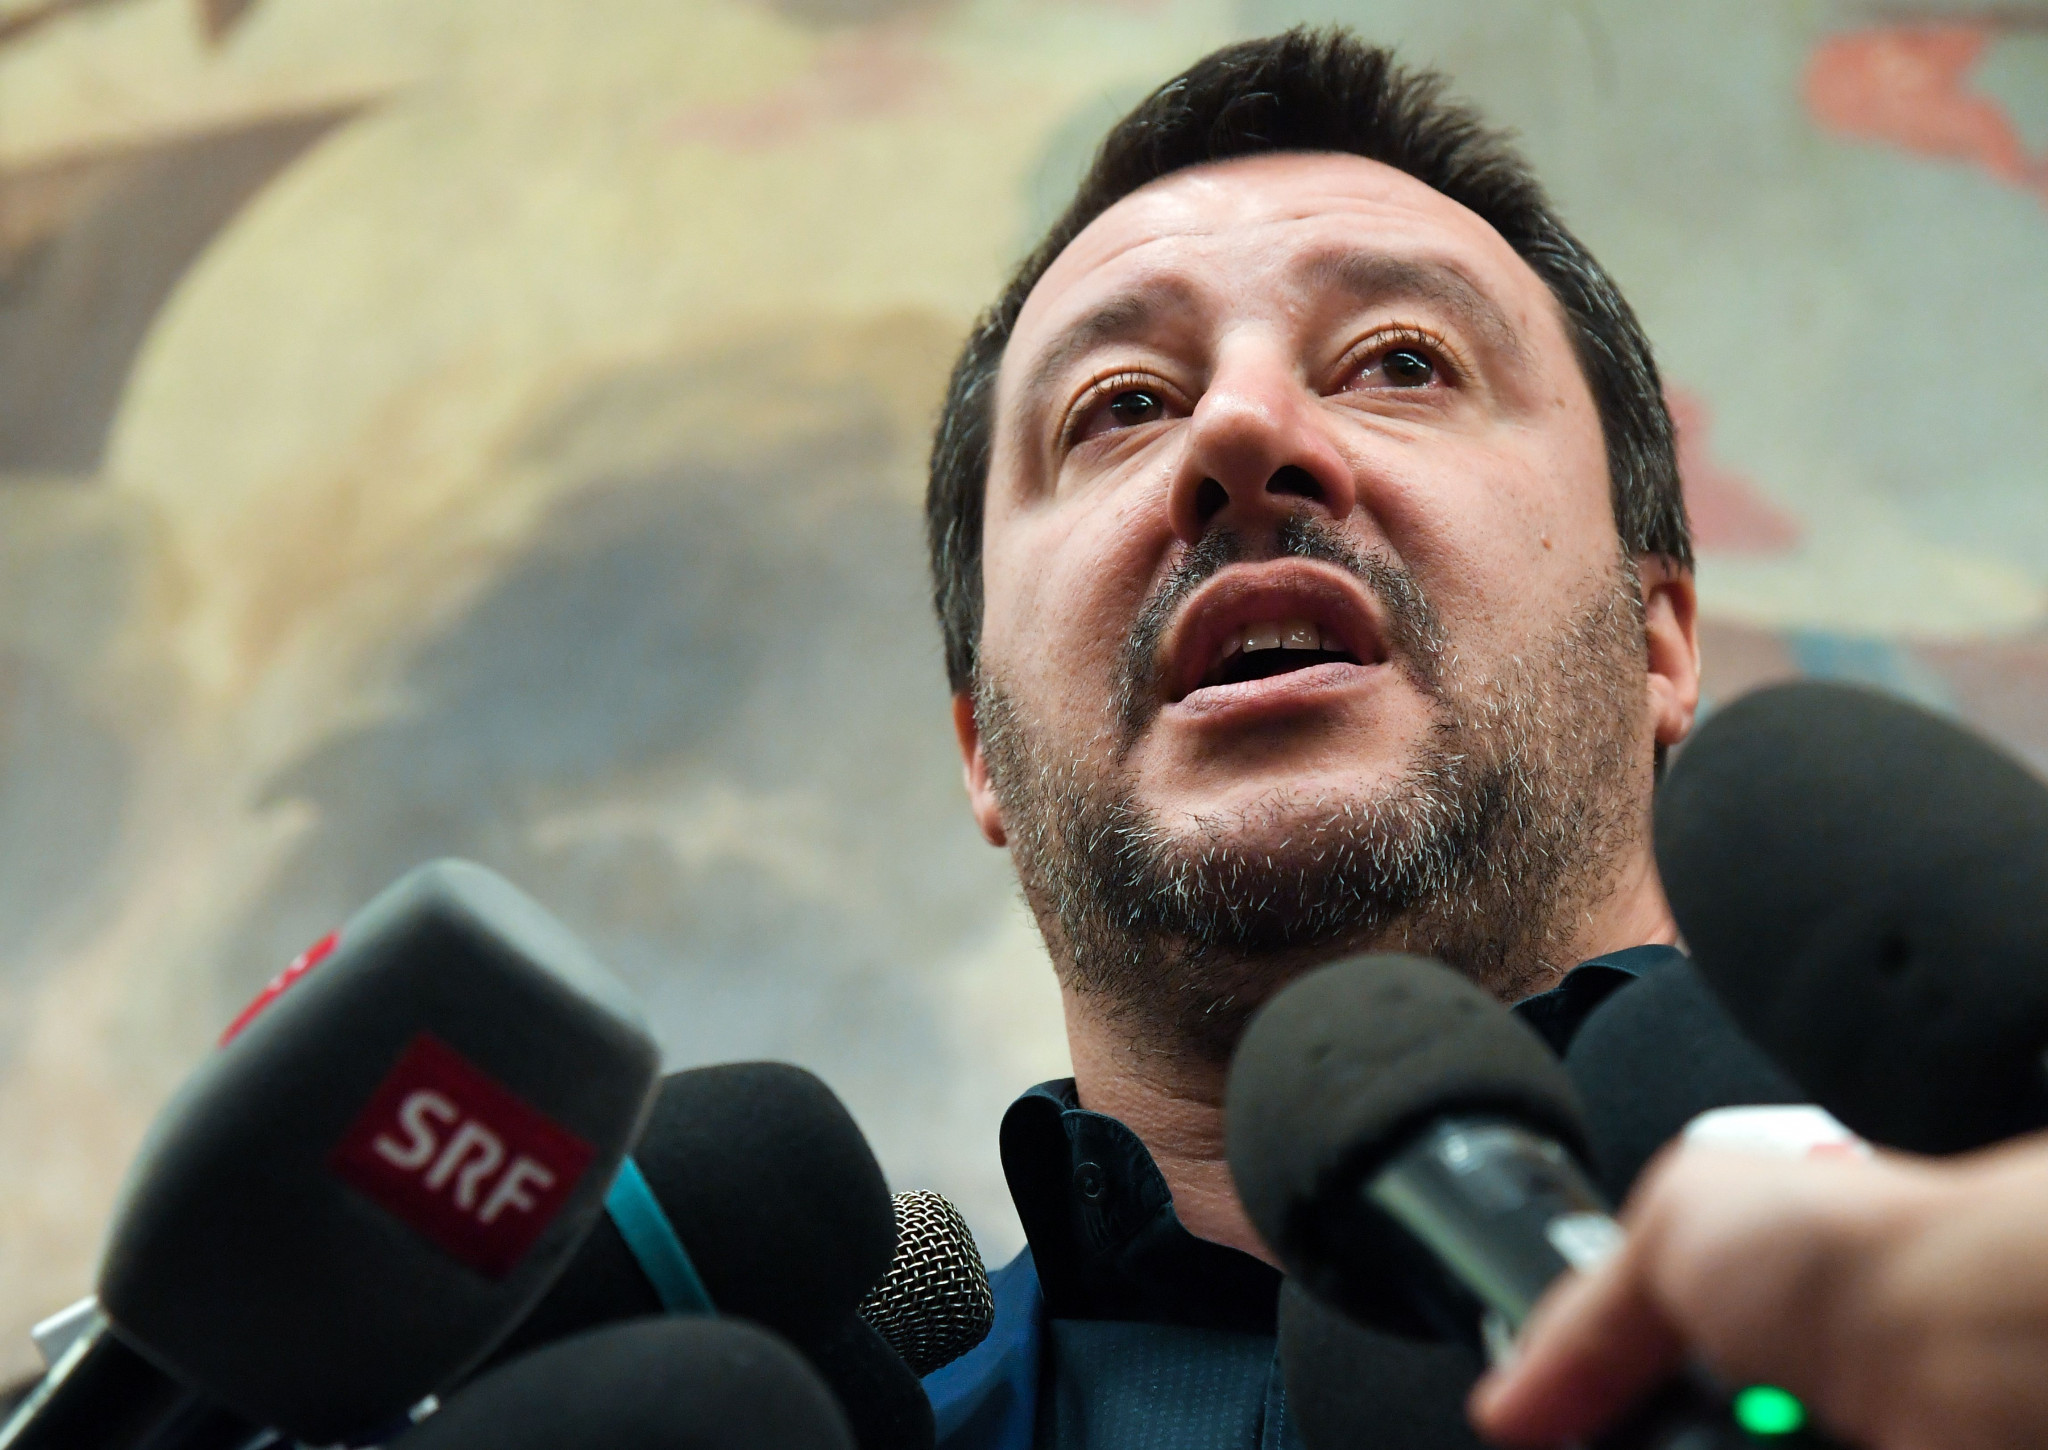 Deputy Prime Minister and Interior Minister Matteo Salvini has claimed the Italian Government must support the Milan and Cortina d'Ampezzo bid for the 2026 Olympic Games ©Getty Images